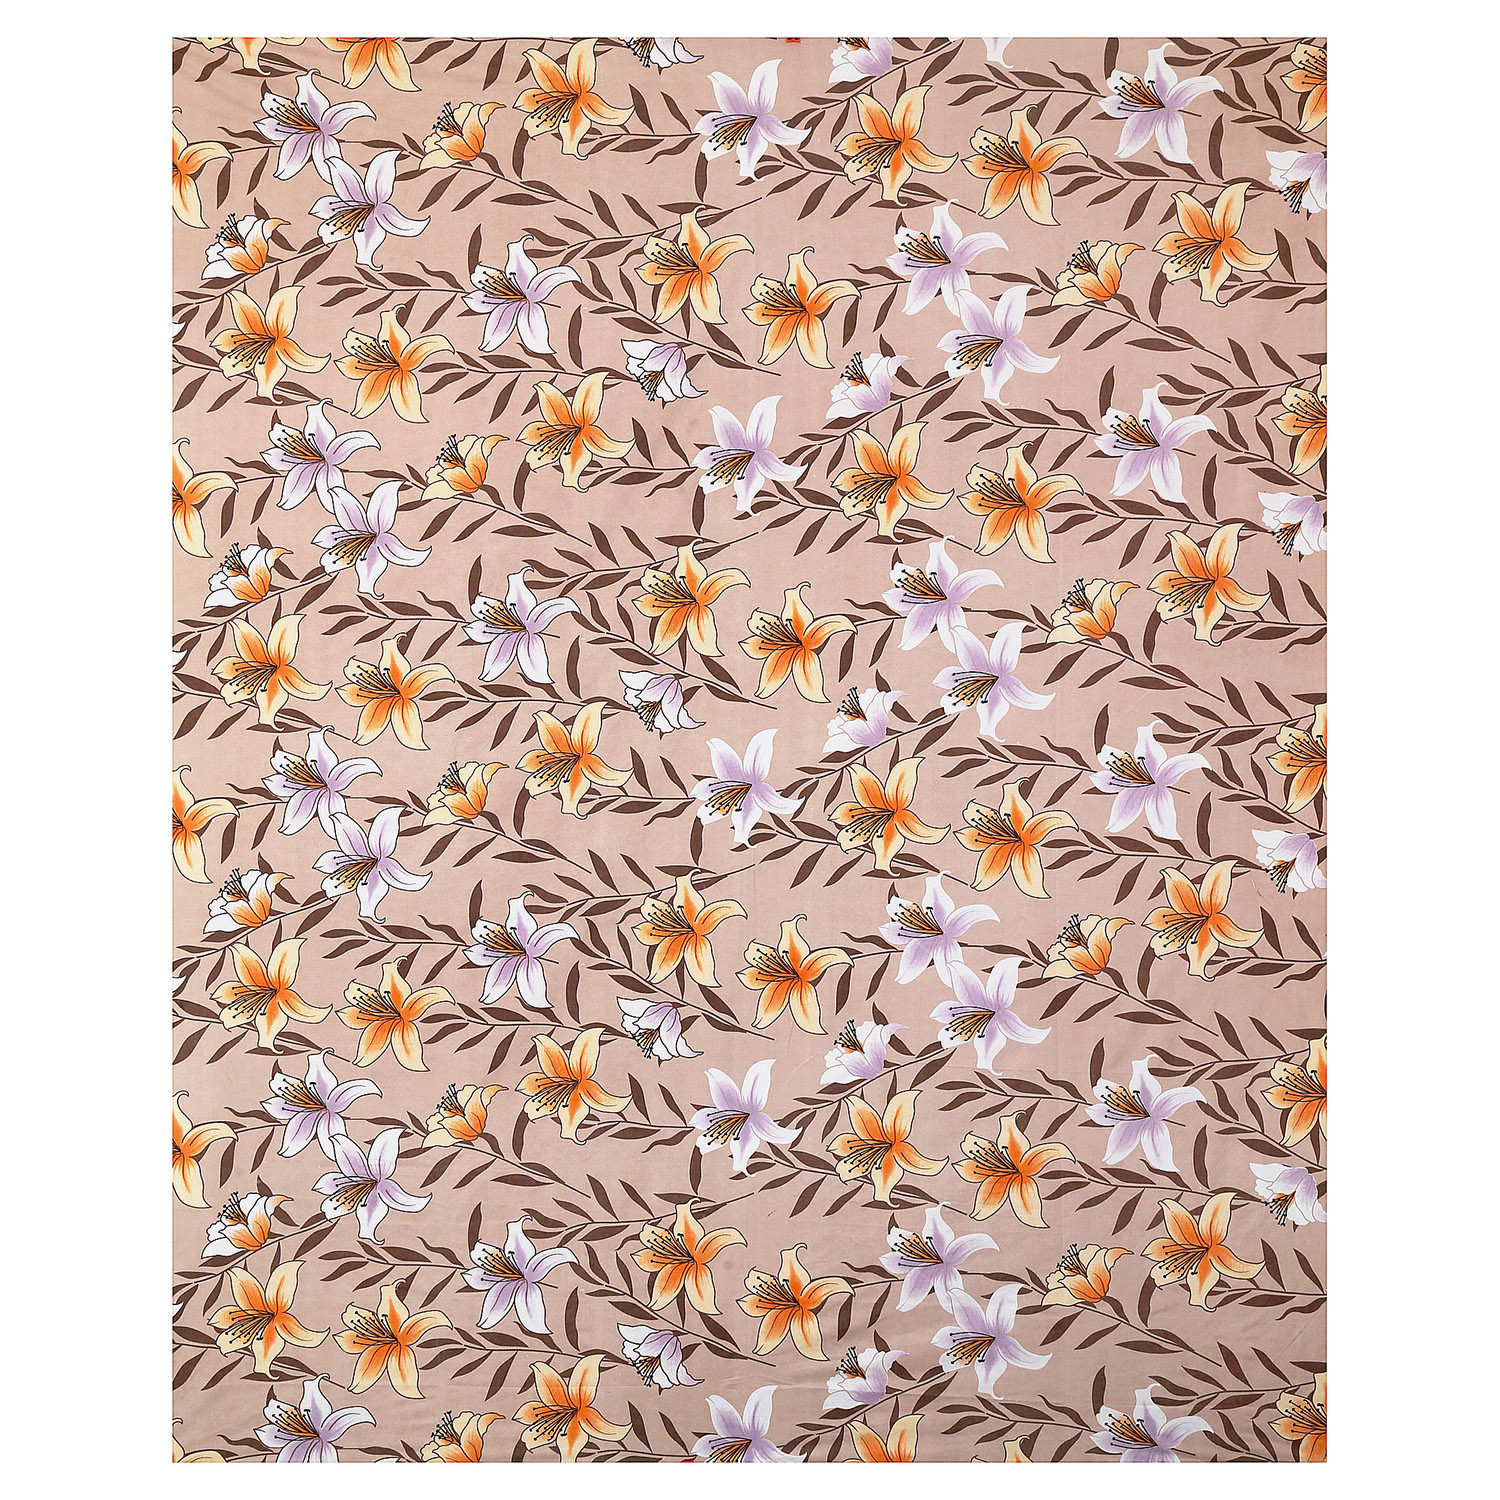 Kuber Industries Glace Cotton Flower Print Double Bedsheet With 2 Pillow Covers,90x108,(Light Brown)